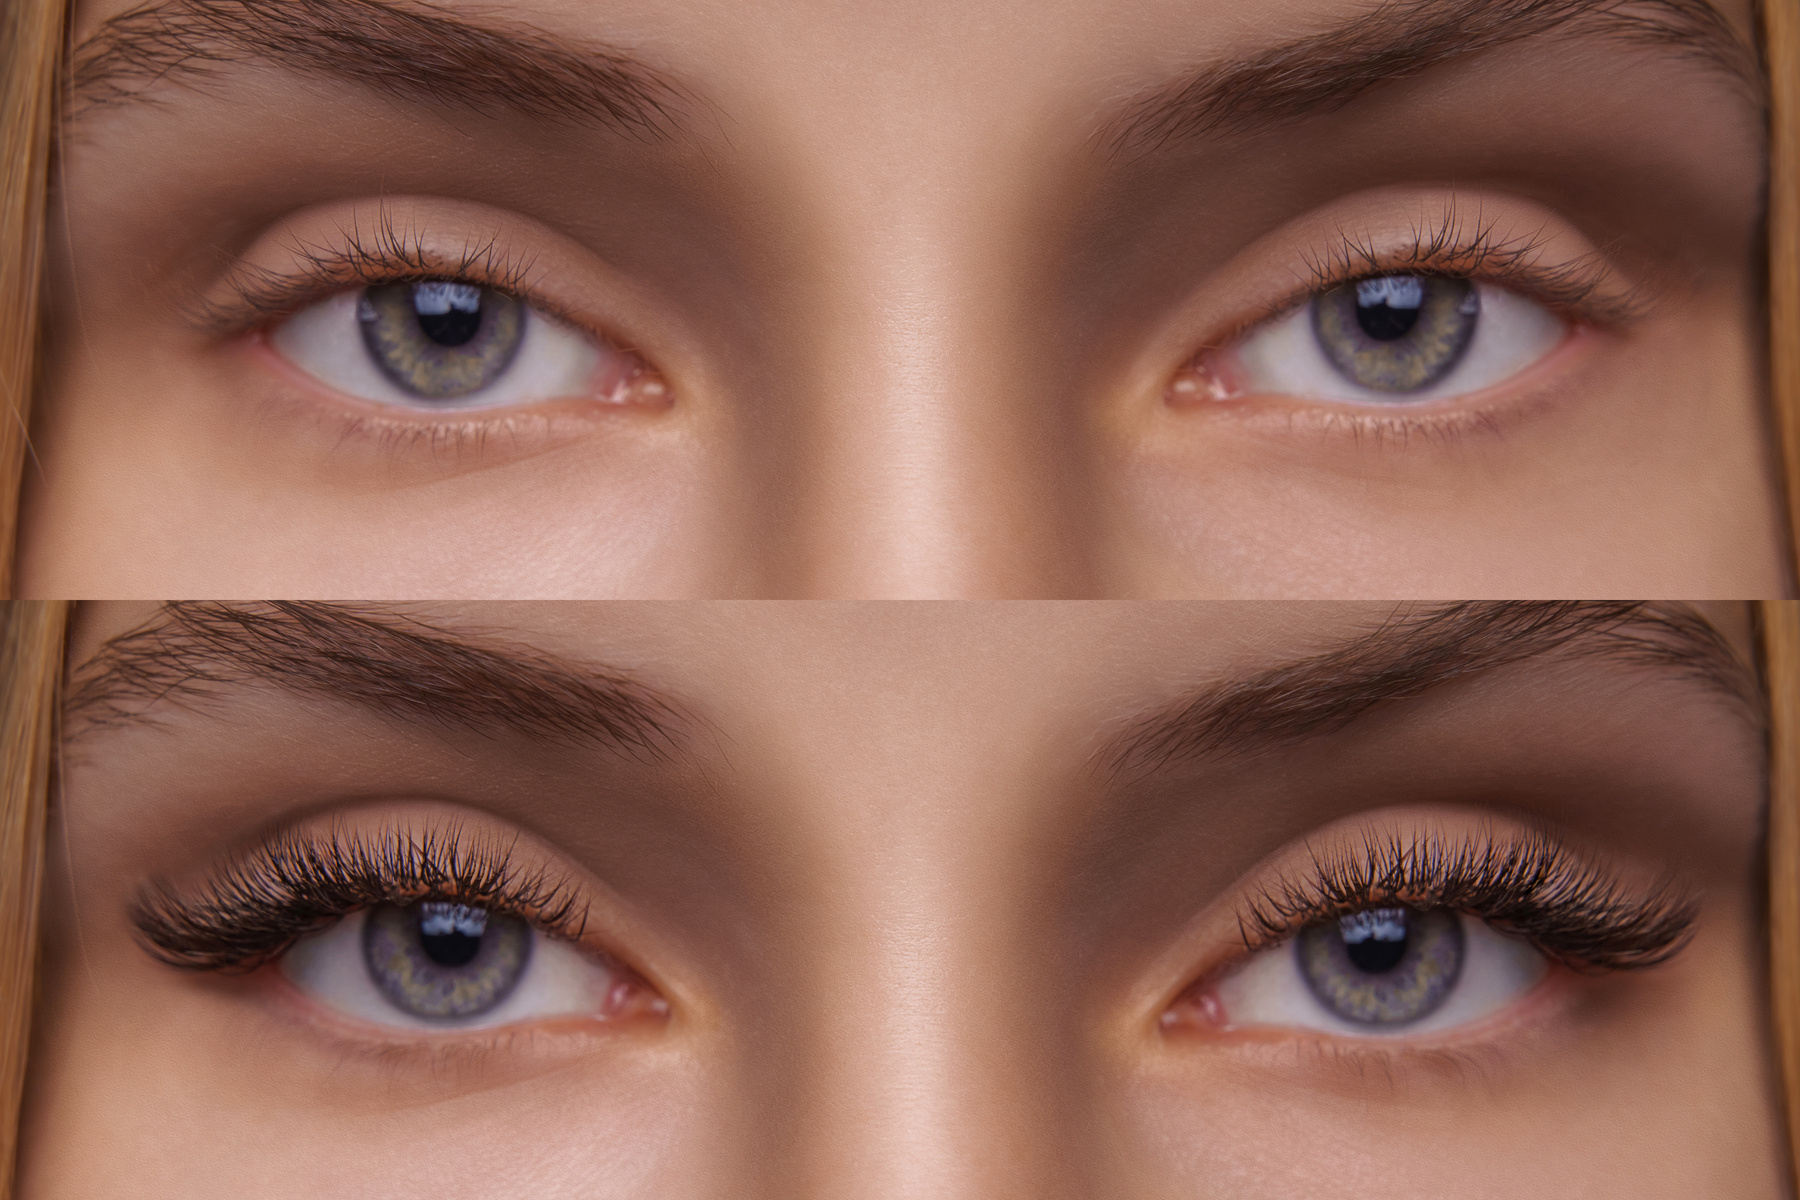 Eyelash Extension. Comparison of female eyes before and after